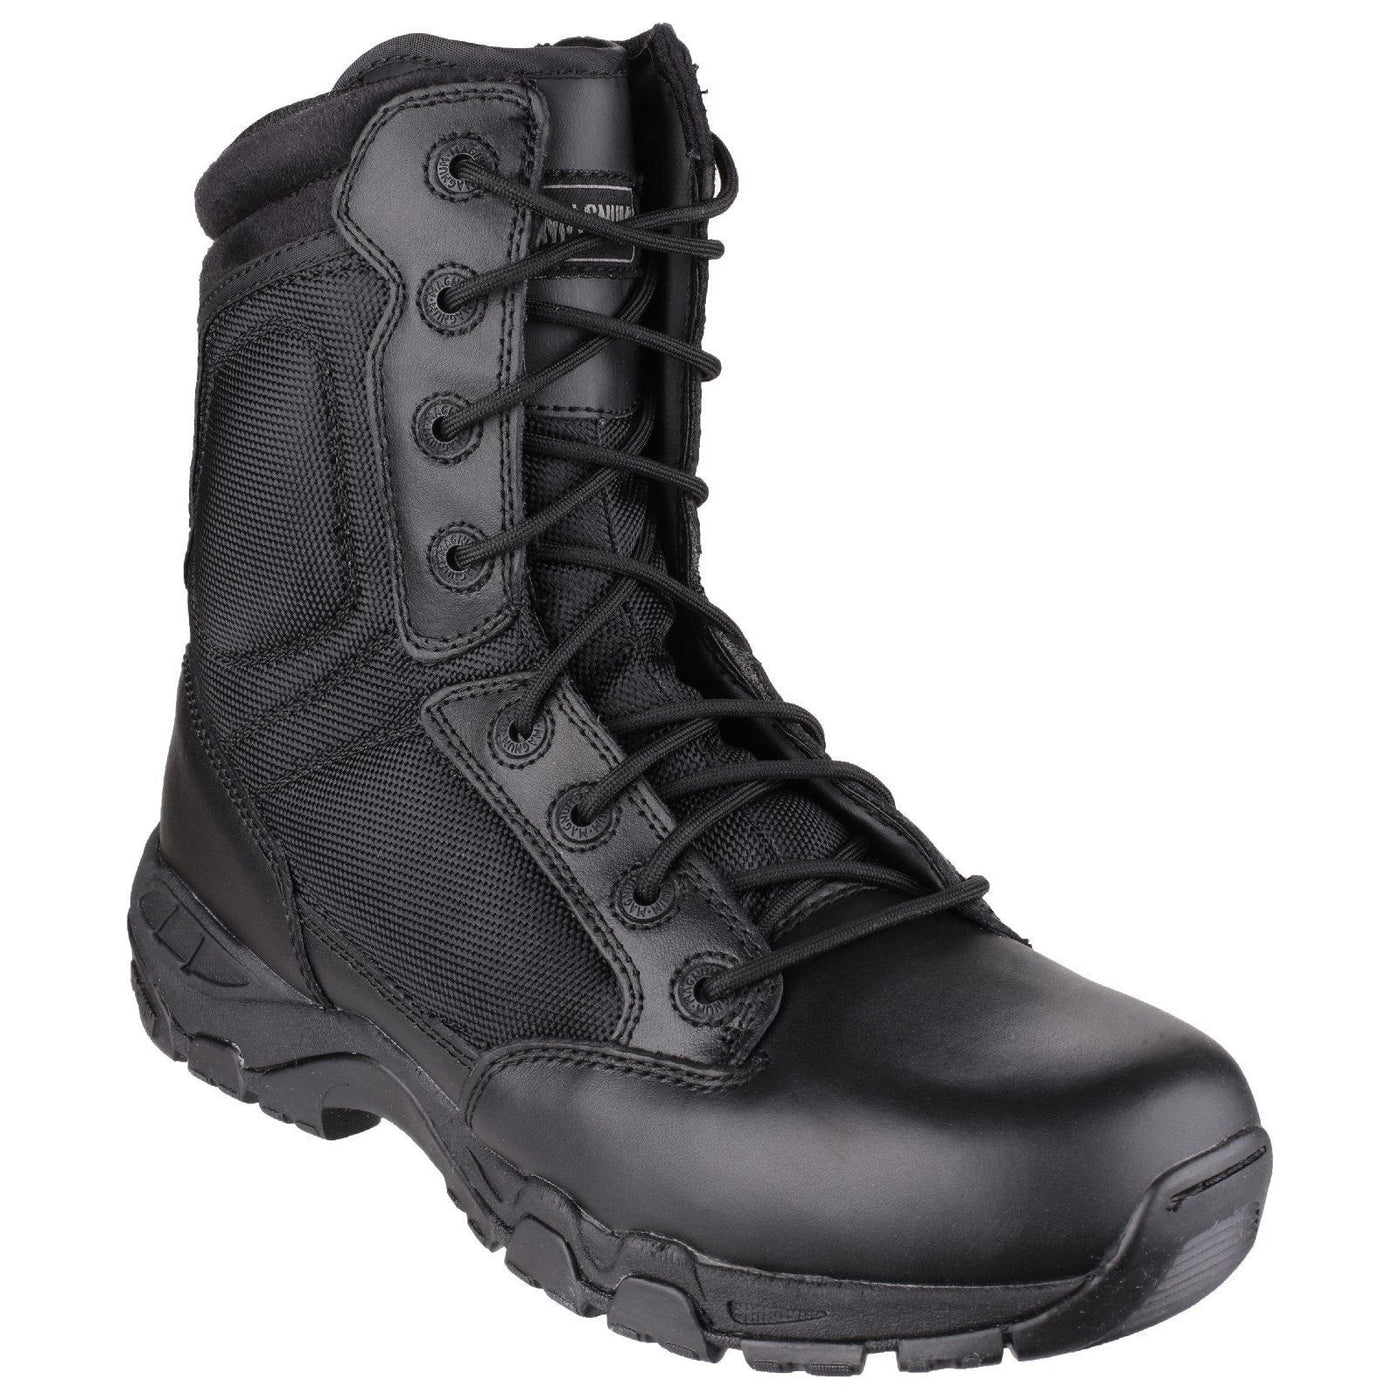 Magnum Viper Pro 8.0 Sz Safety Boots Womens